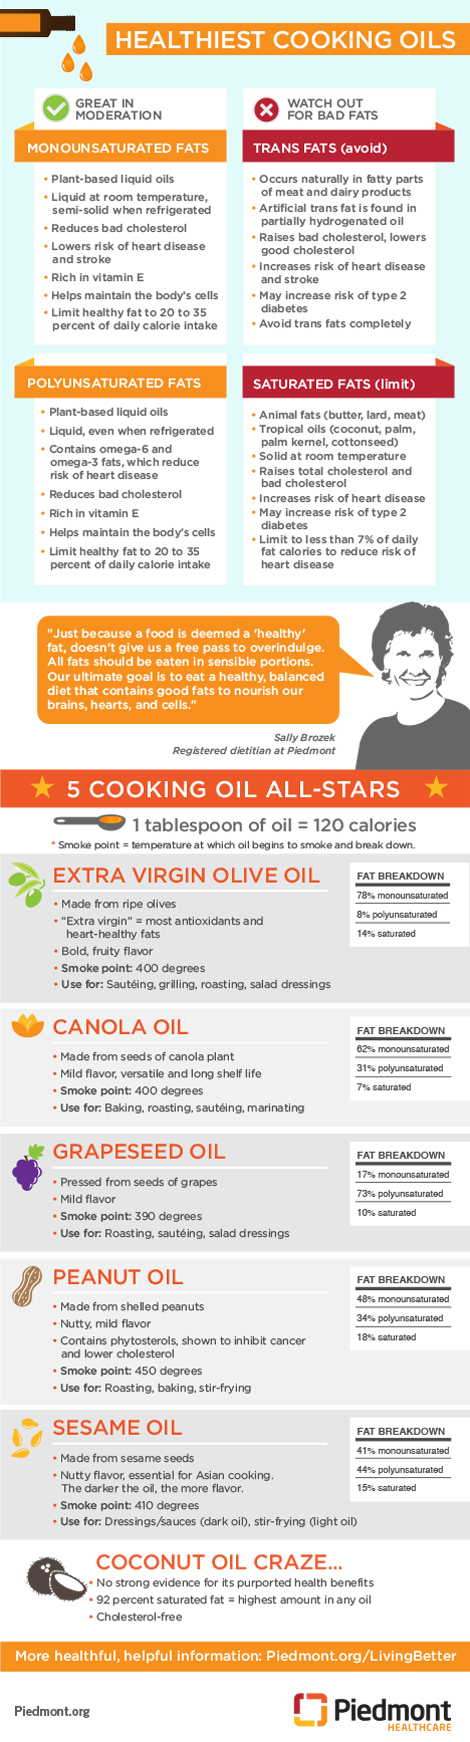 Healthiest cooking oils graphic